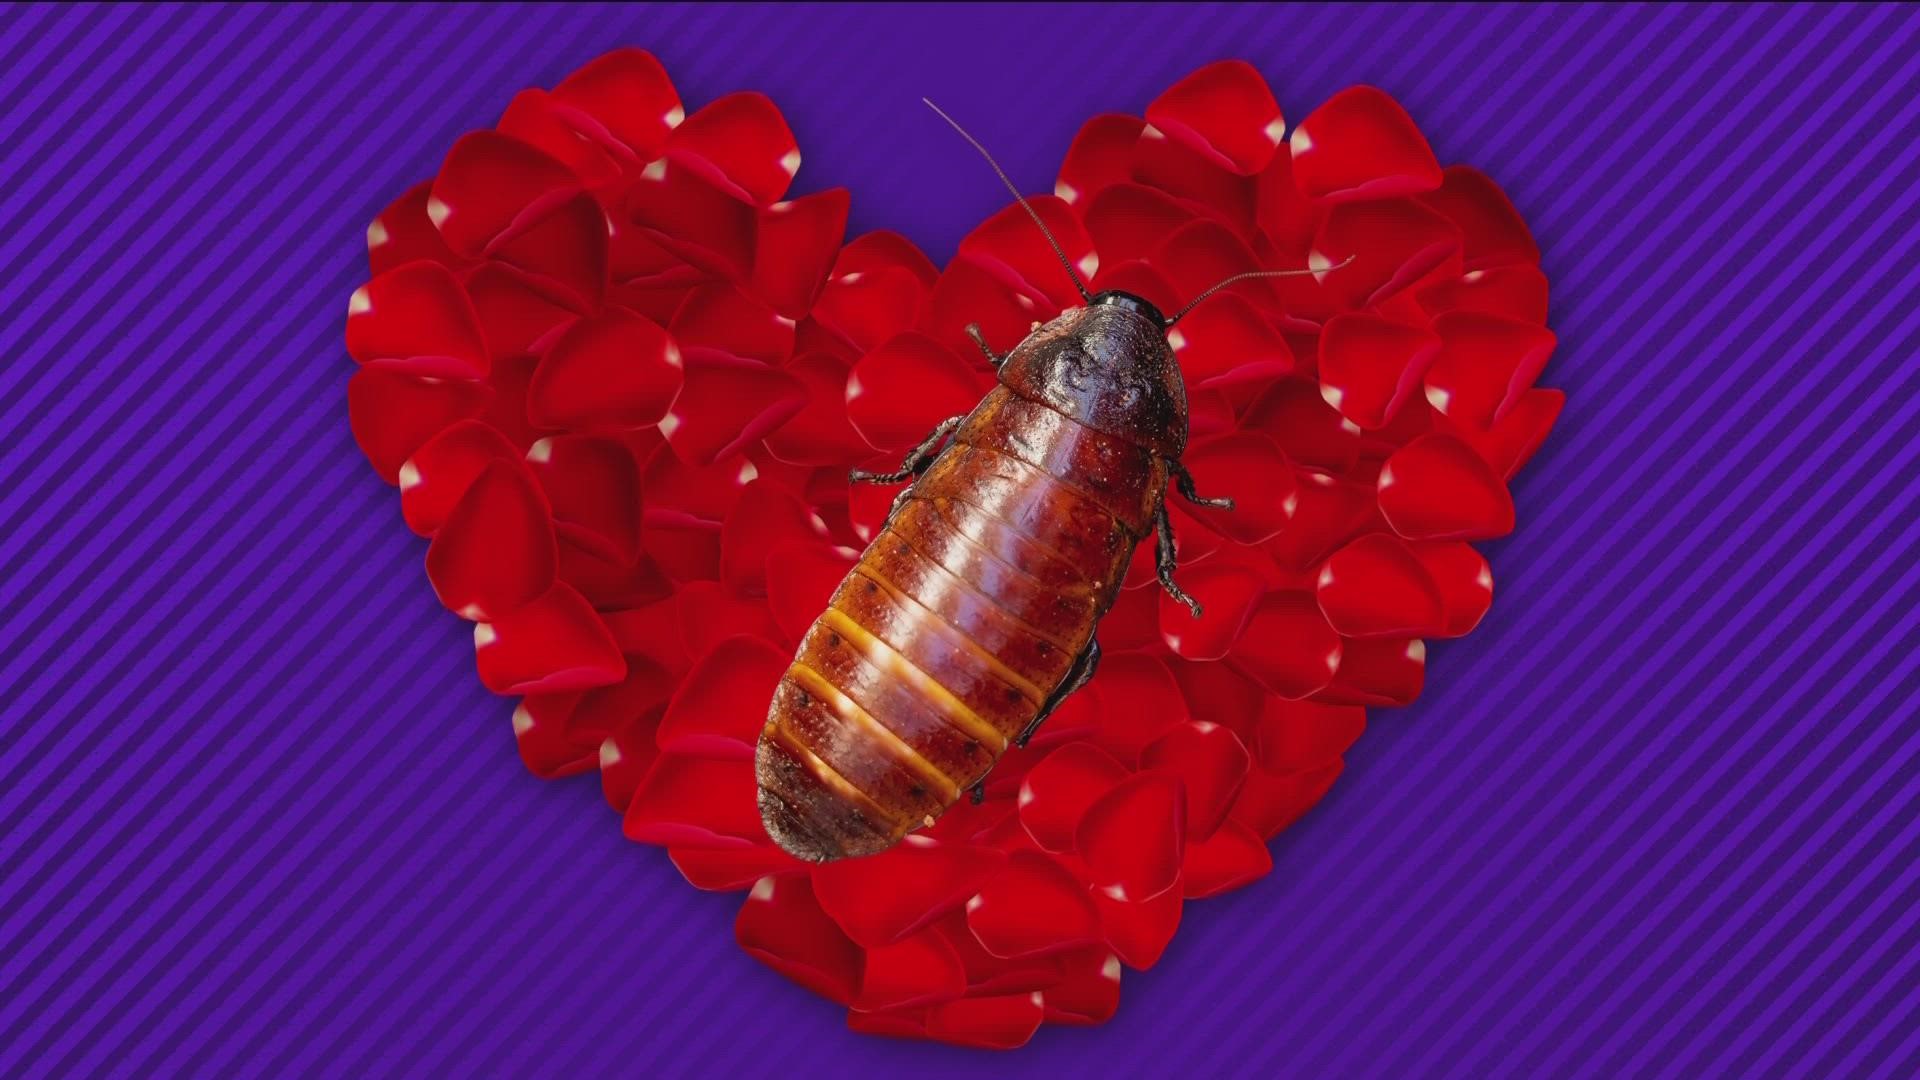 Whether your love can withstand almost anything, or you can't stand your ex, naming a cockroach for Valentine's Day might be cathartic.